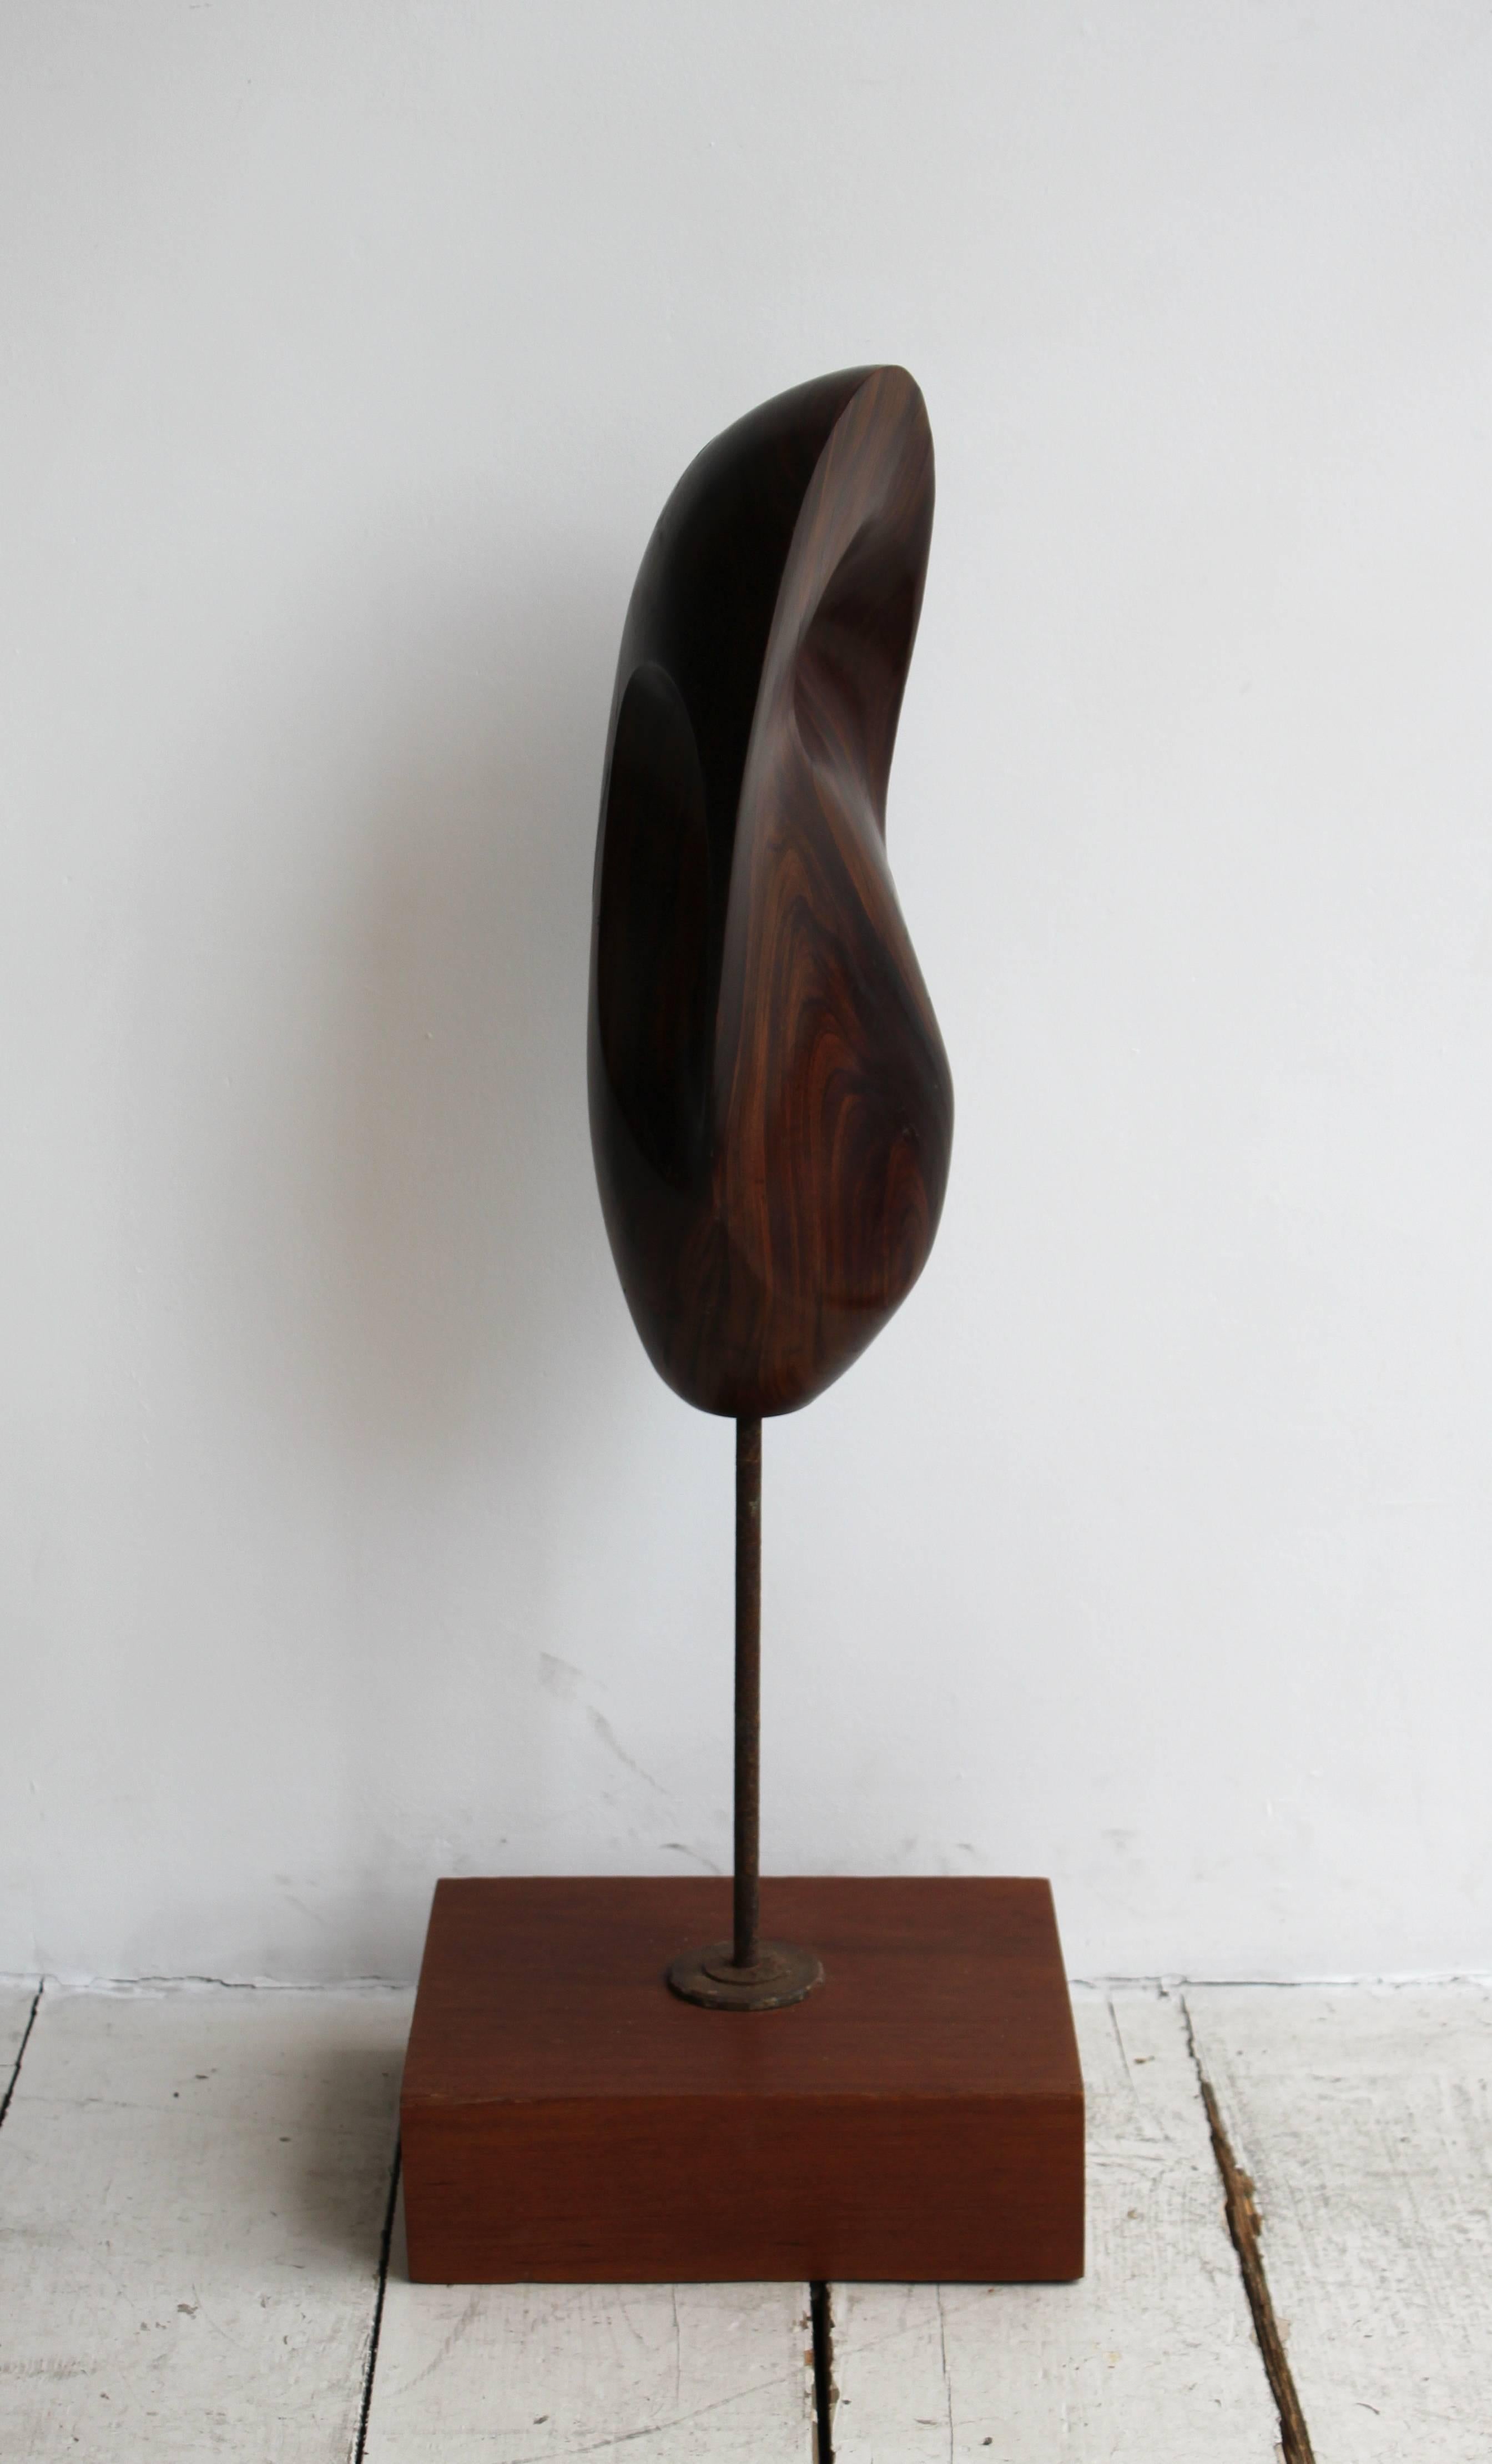 Carved Curved Wooden Sculpture by Bertram Eaton from 1960s For Sale